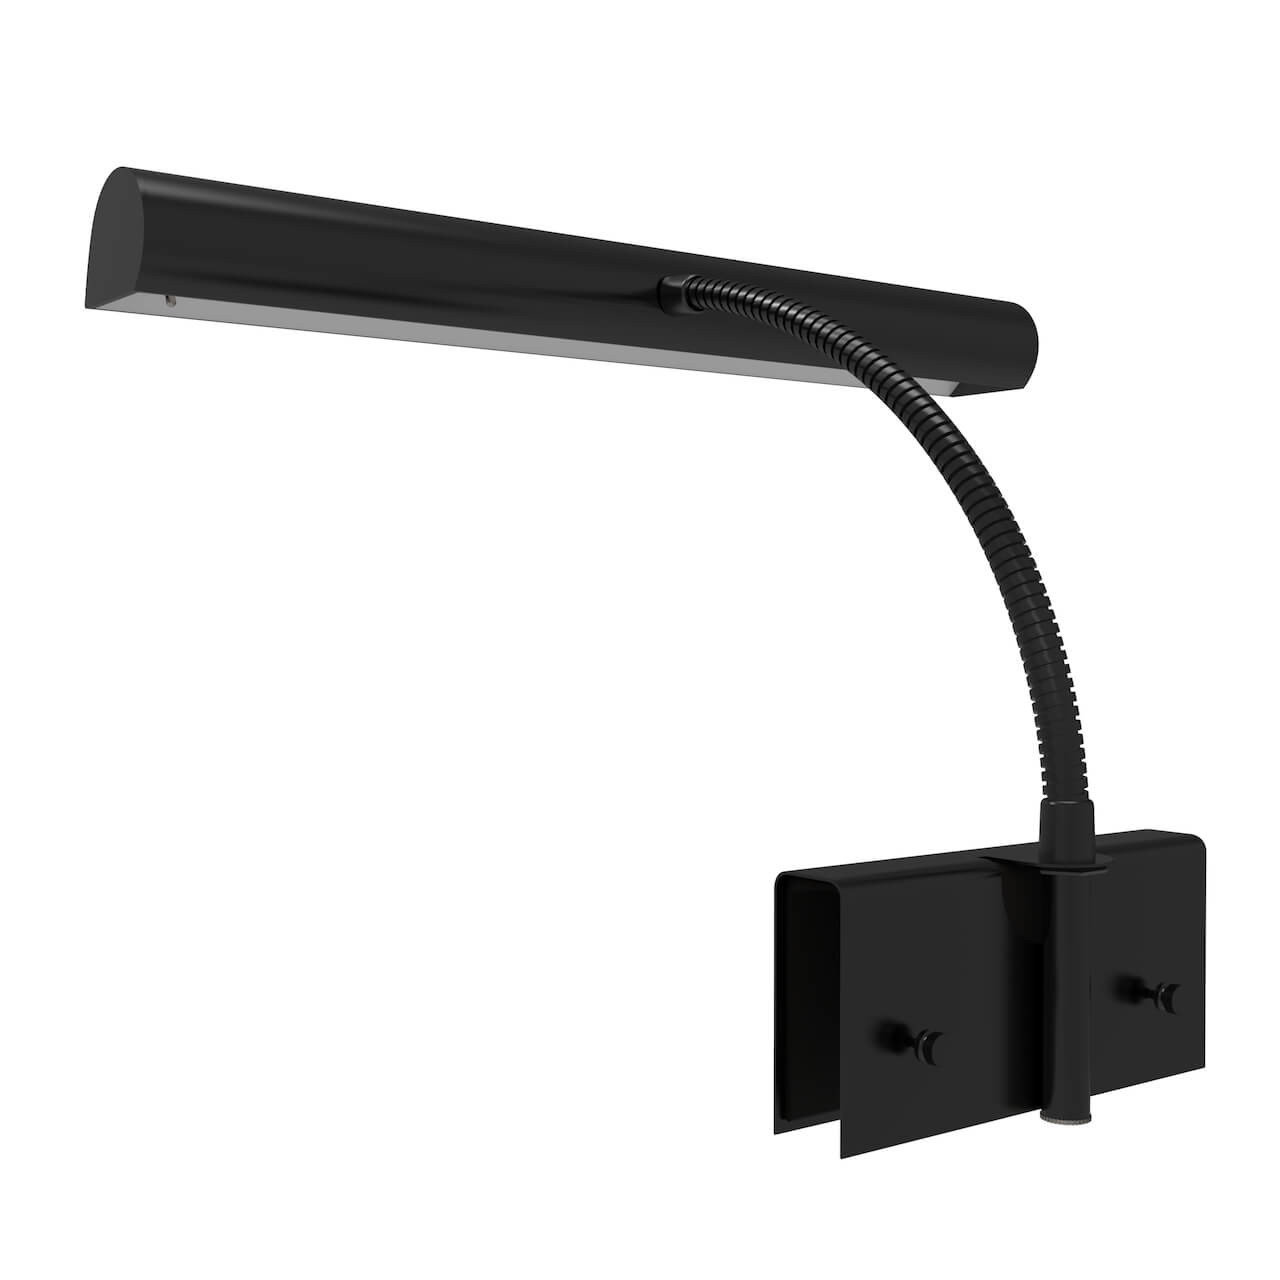 Gooseneck Piano Light with LED technology that fits most Steinway